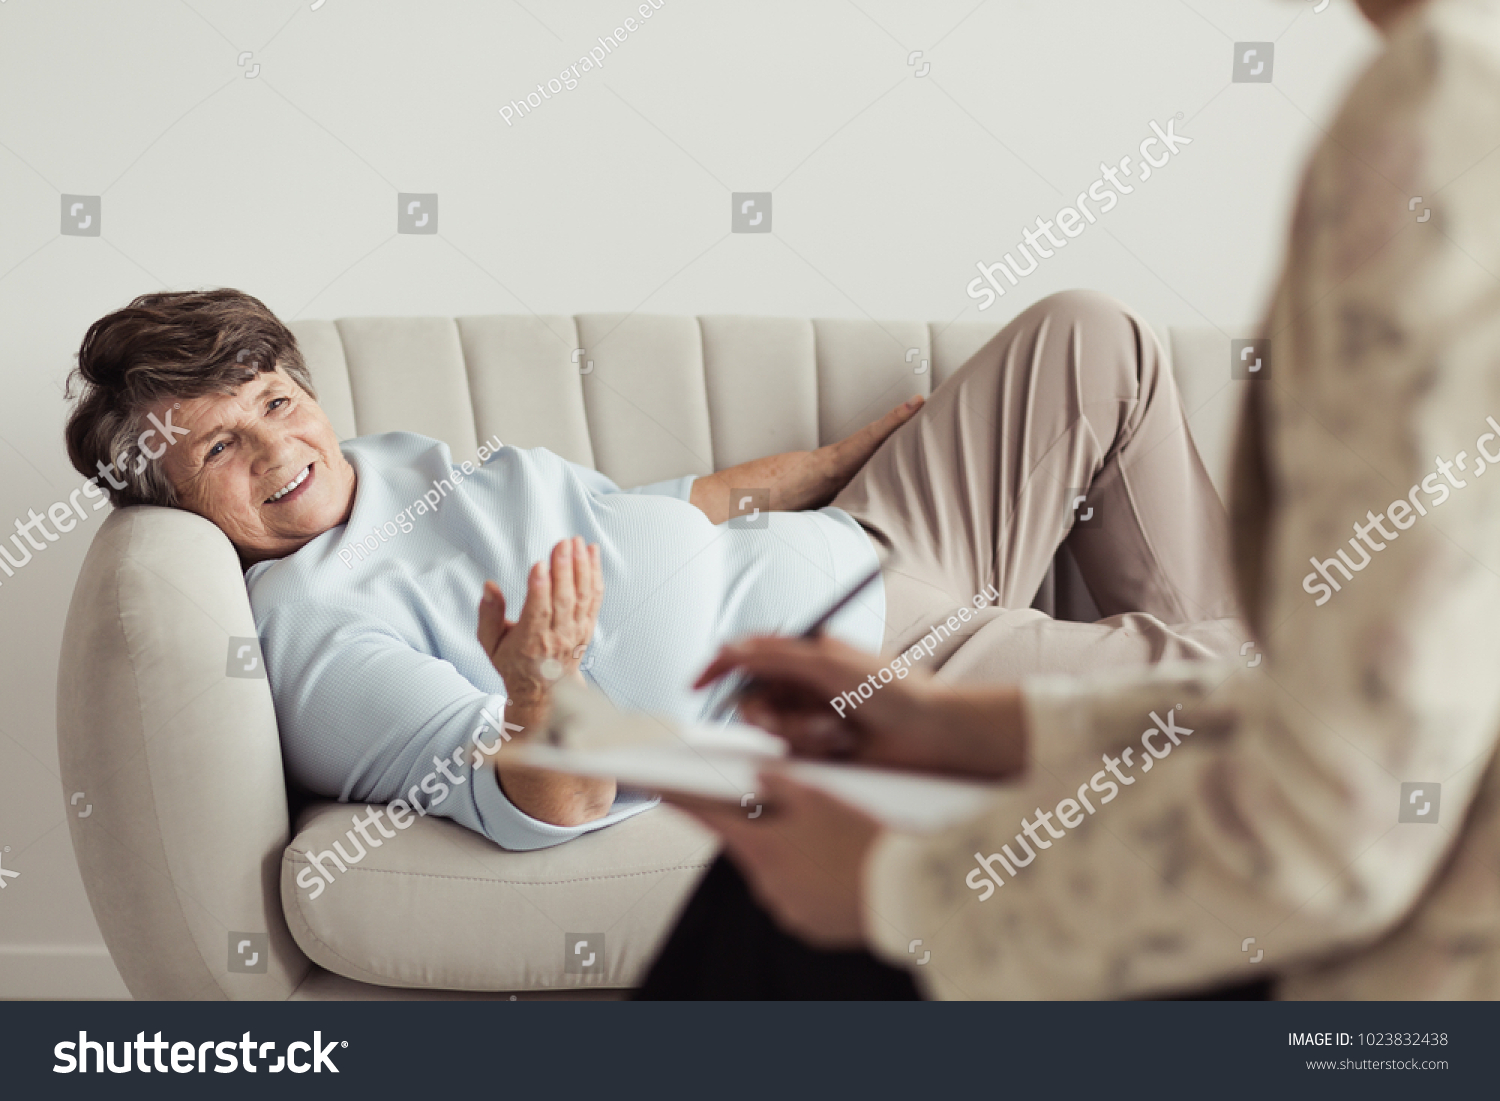 Satisfied elderly woman lying on a settee and talking with a counselor during her appointment #1023832438